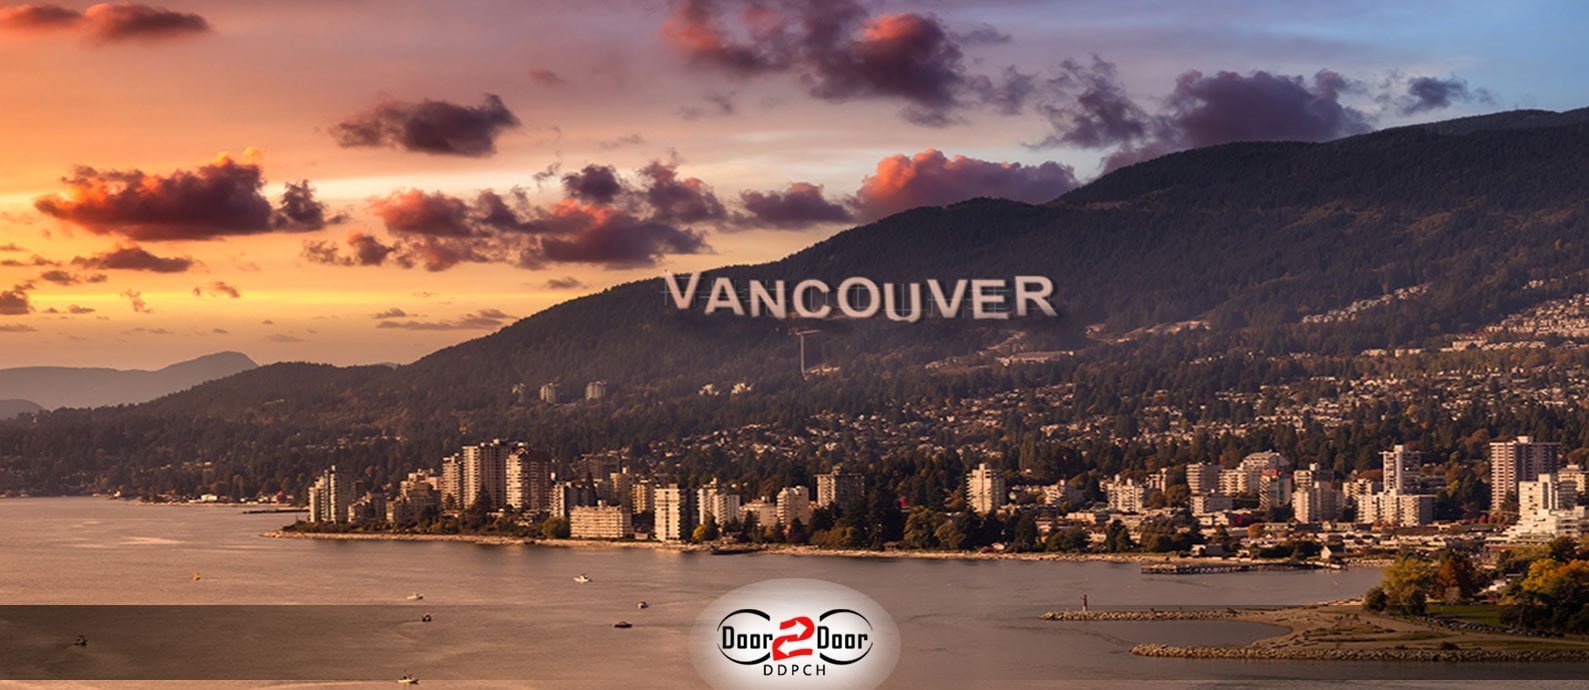 Shipping from China for Vancouver – Tips, Costs, and Regulations